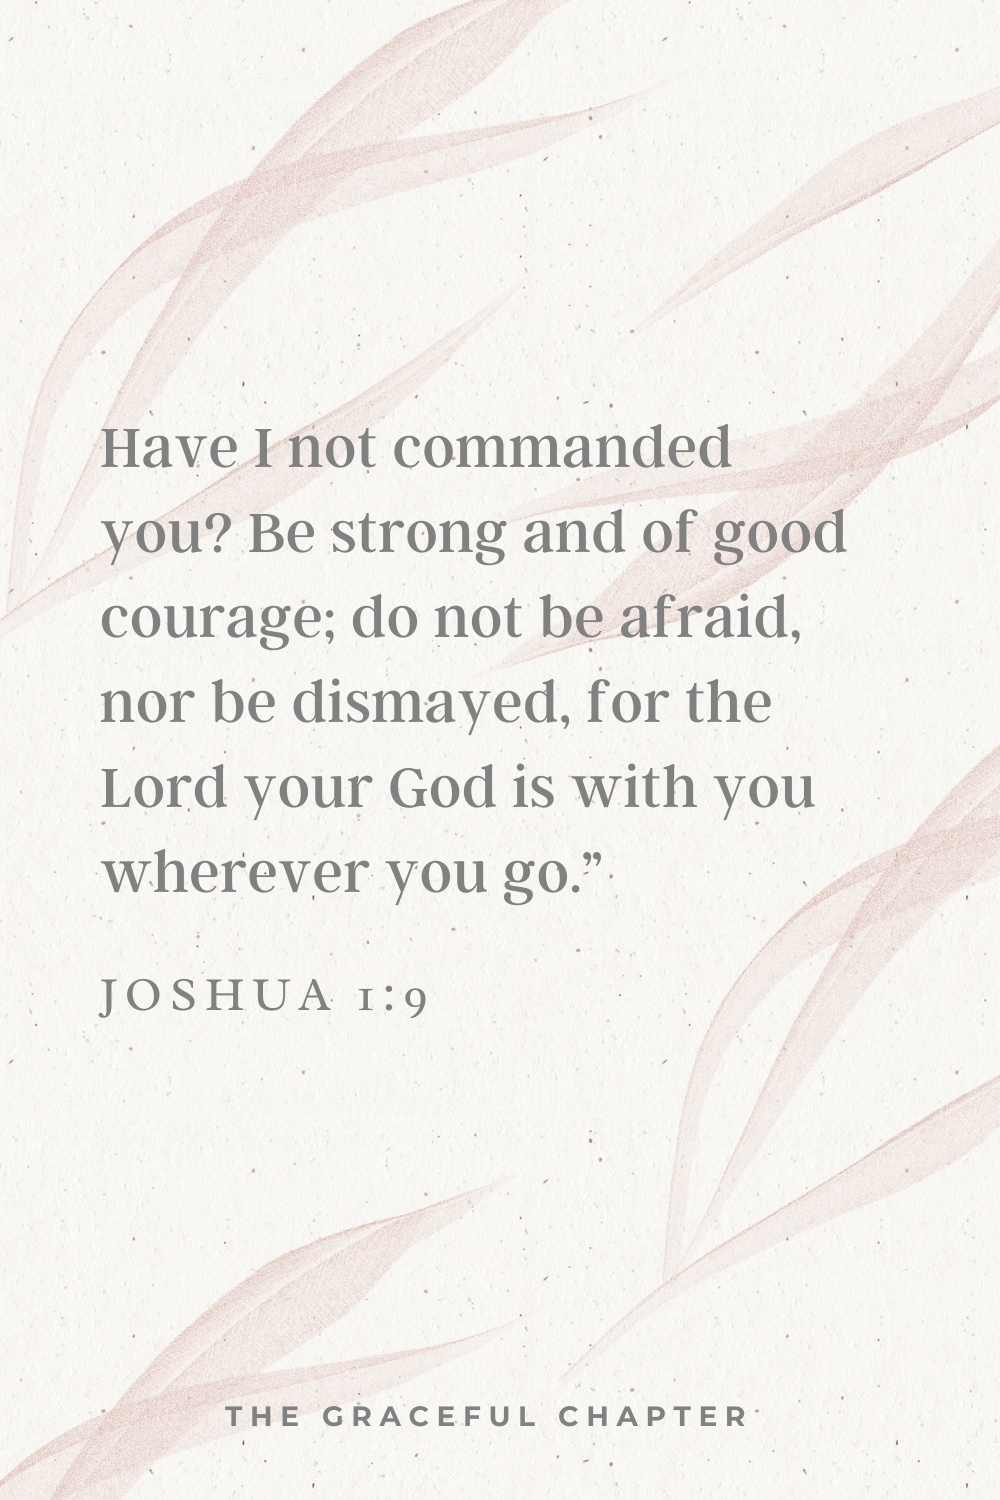 Have I not commanded you? Be strong and of good courage; do not be afraid, nor be dismayed, for the Lord your God is with you wherever you go.”  Joshua 1:9